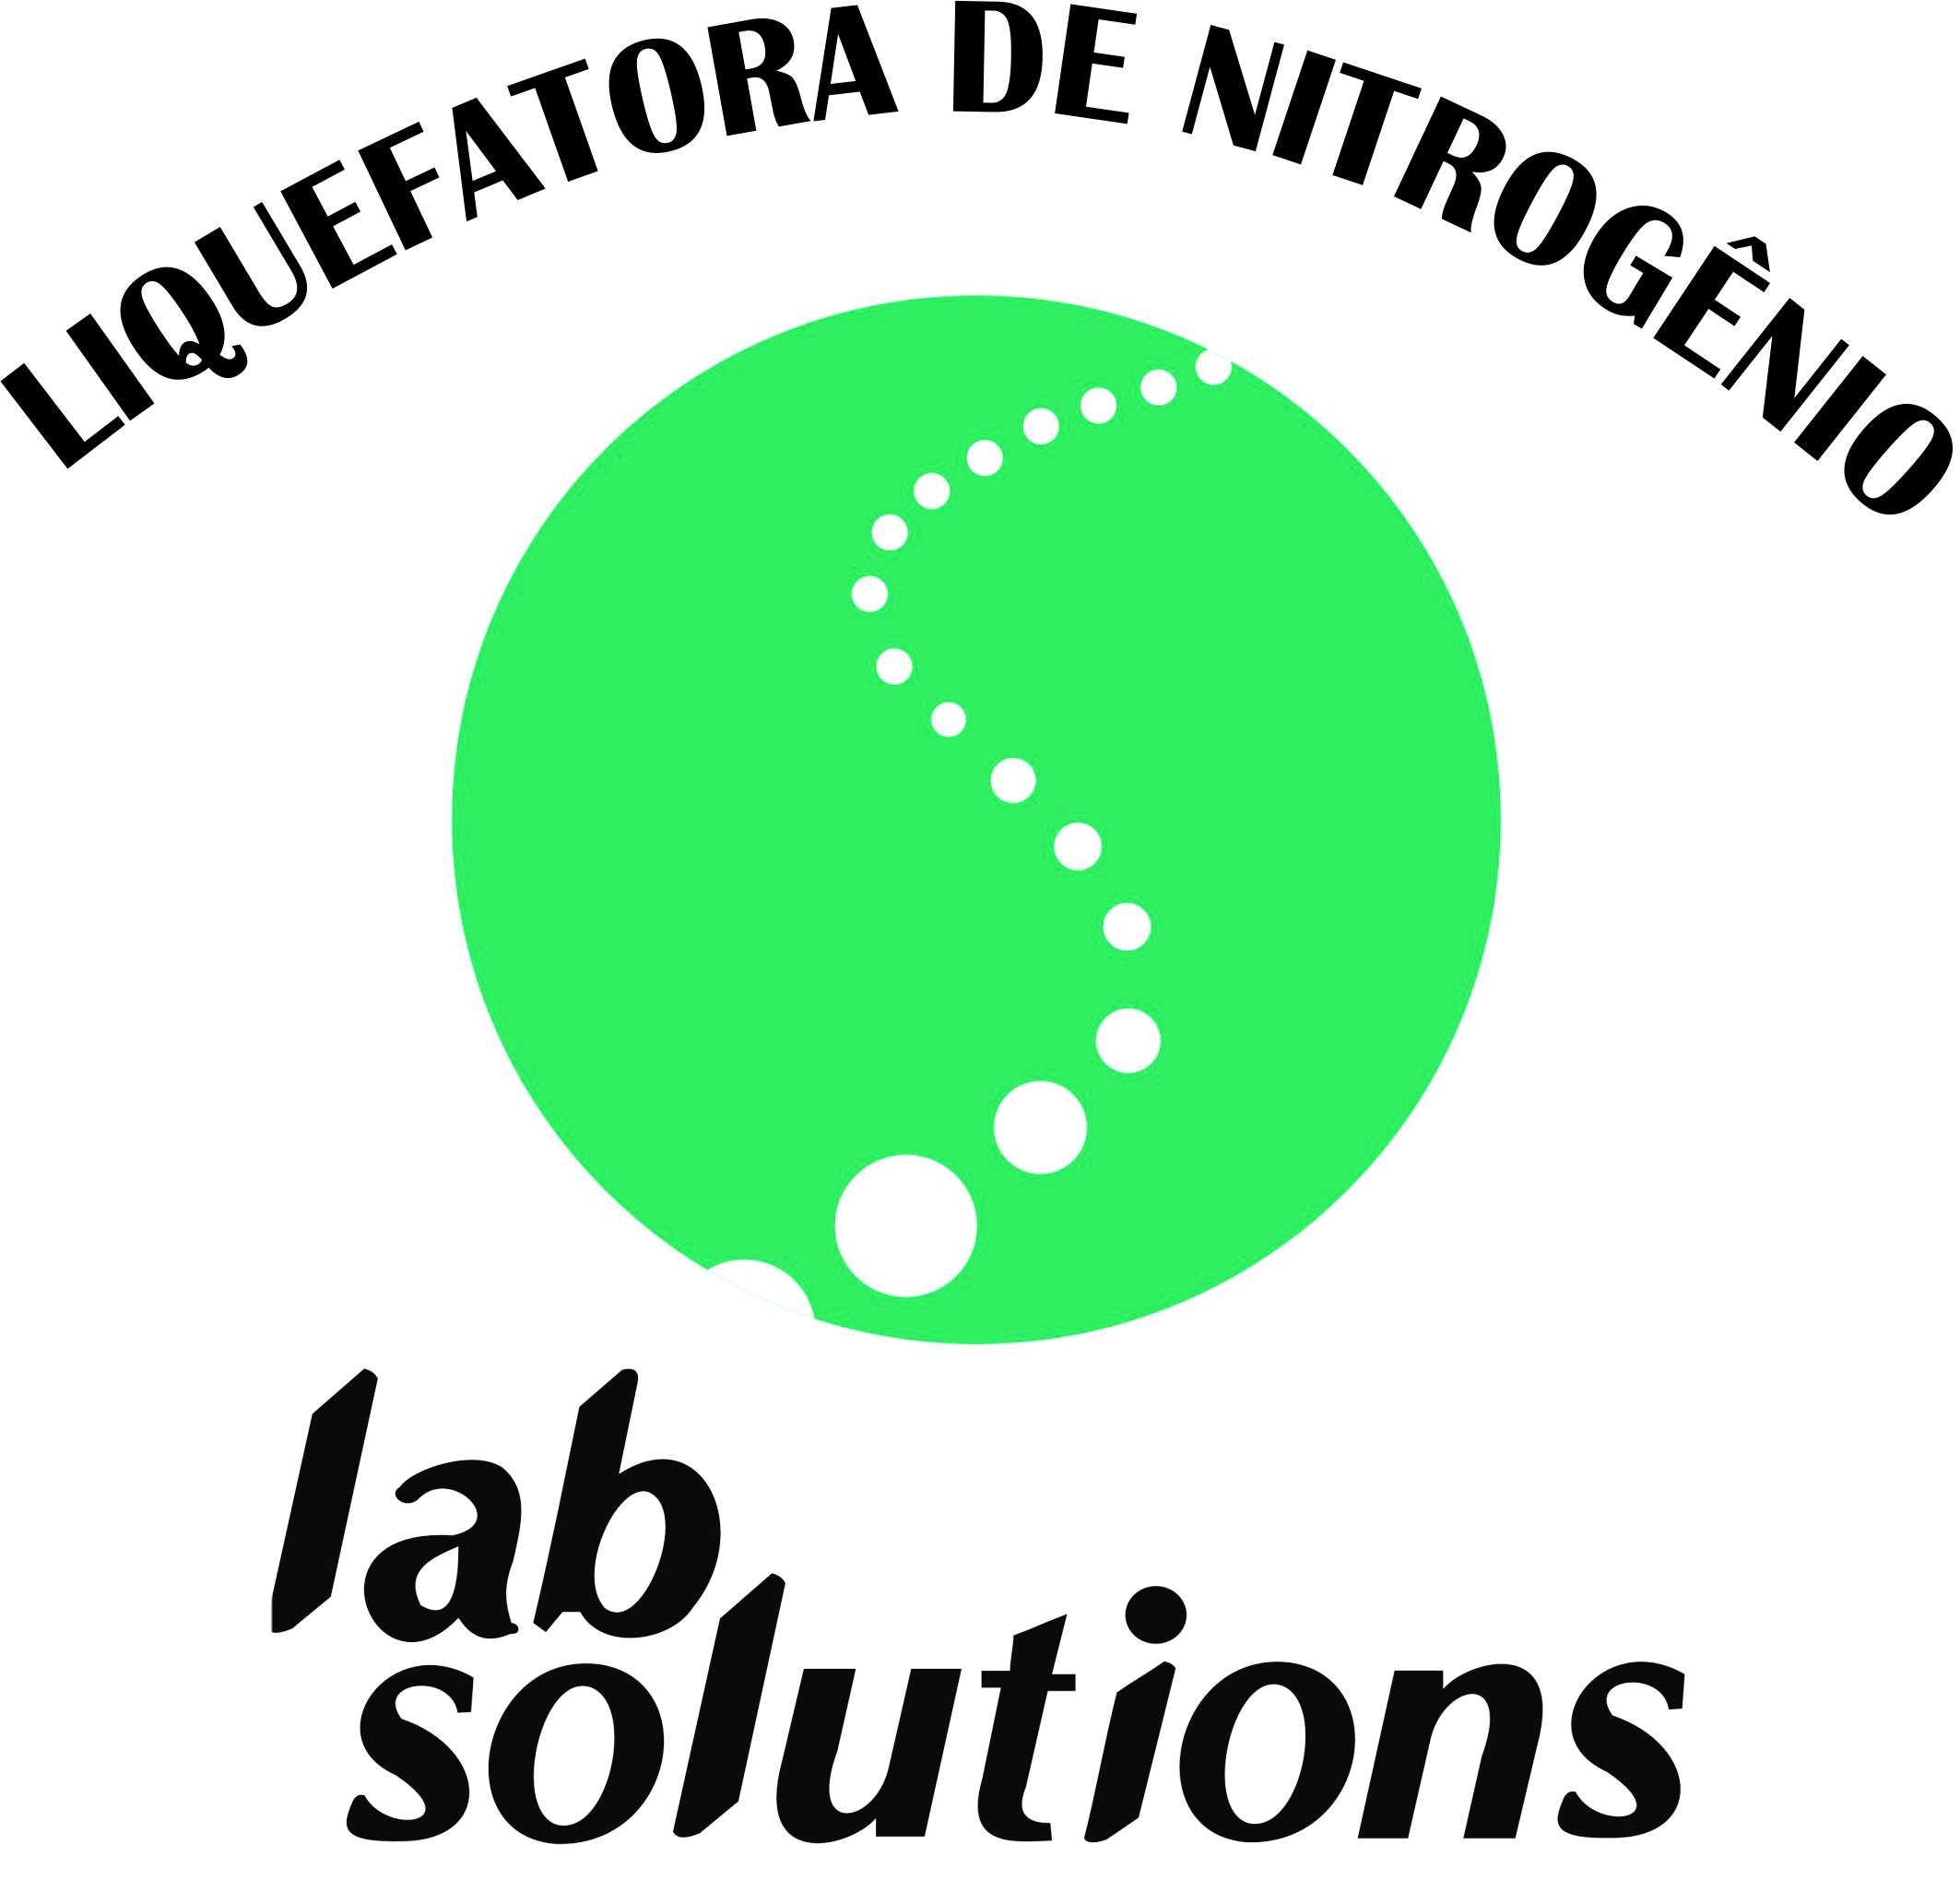 LABSOLUTIONS